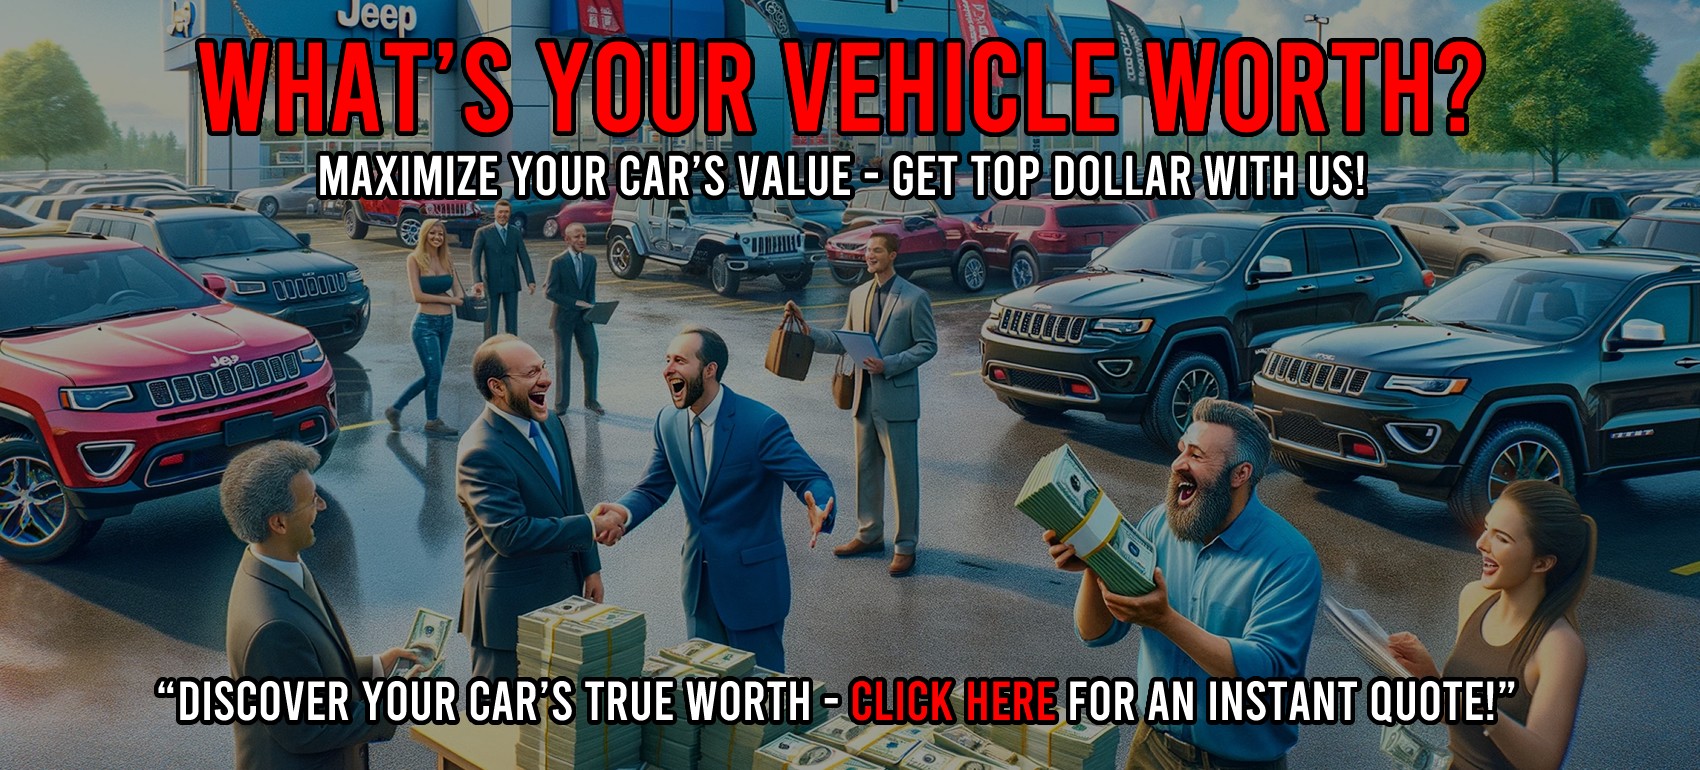 Whats your car worth